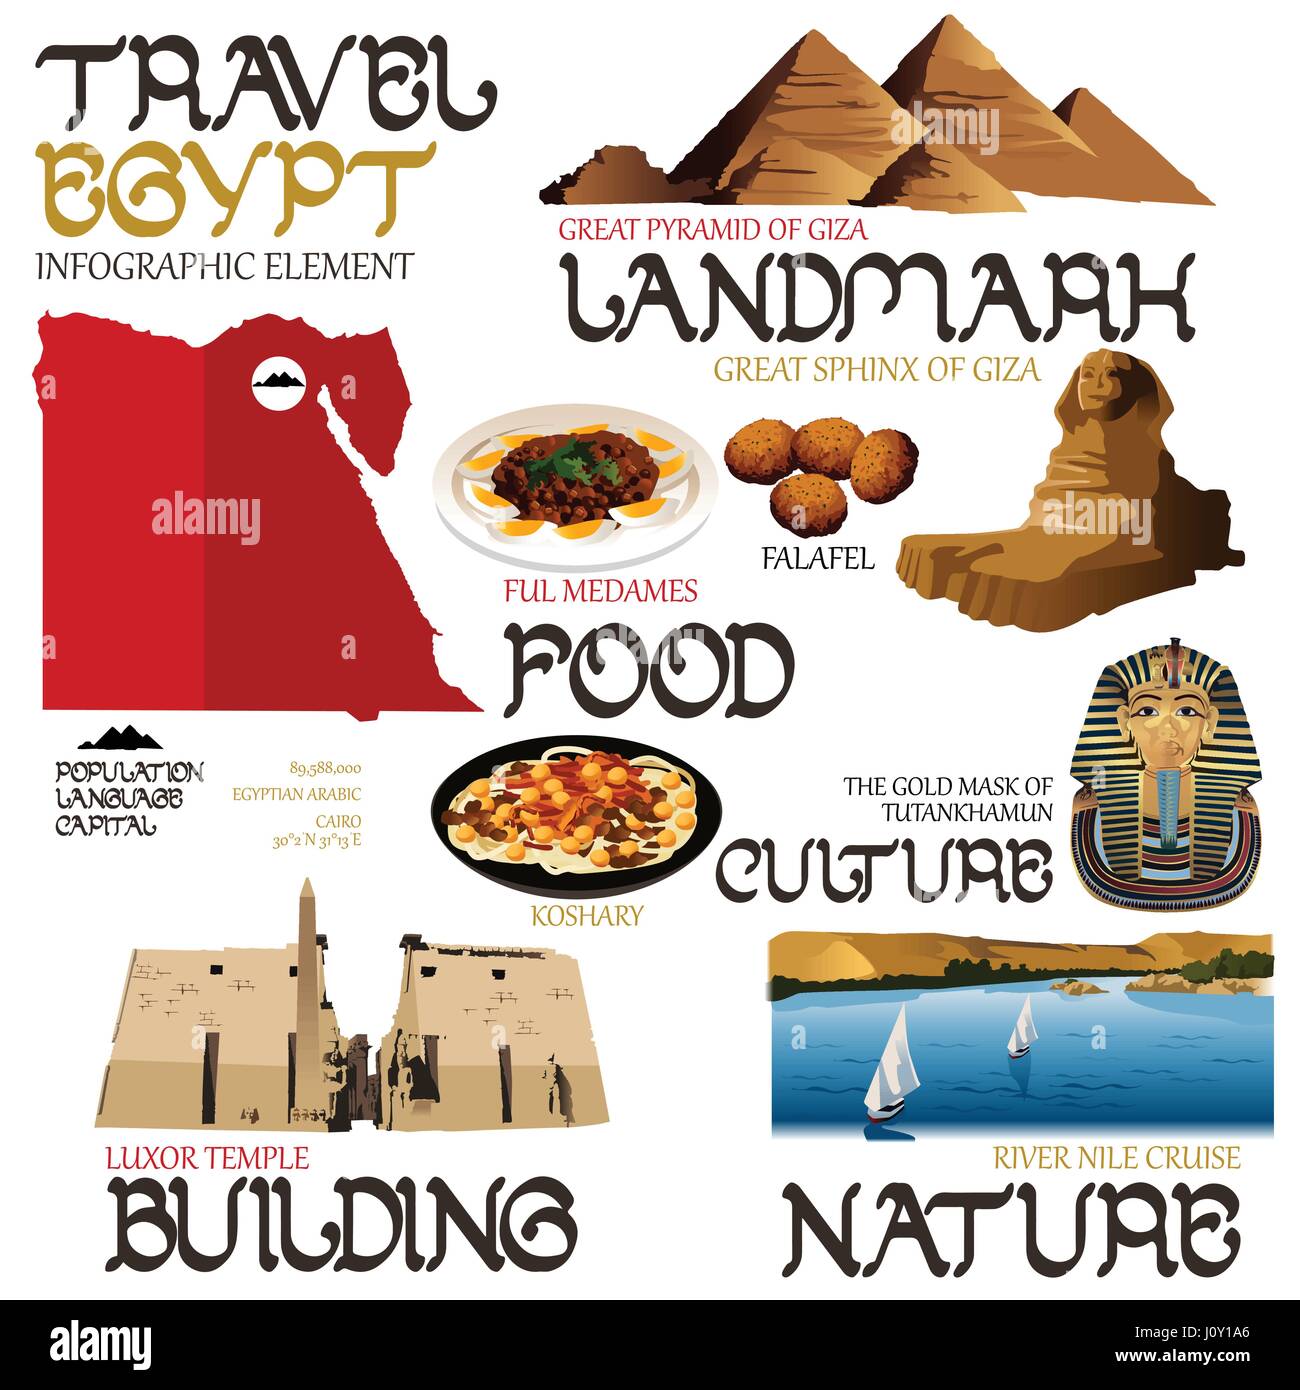 A vector illustration of infographic elements for traveling to Egypt Stock Vector